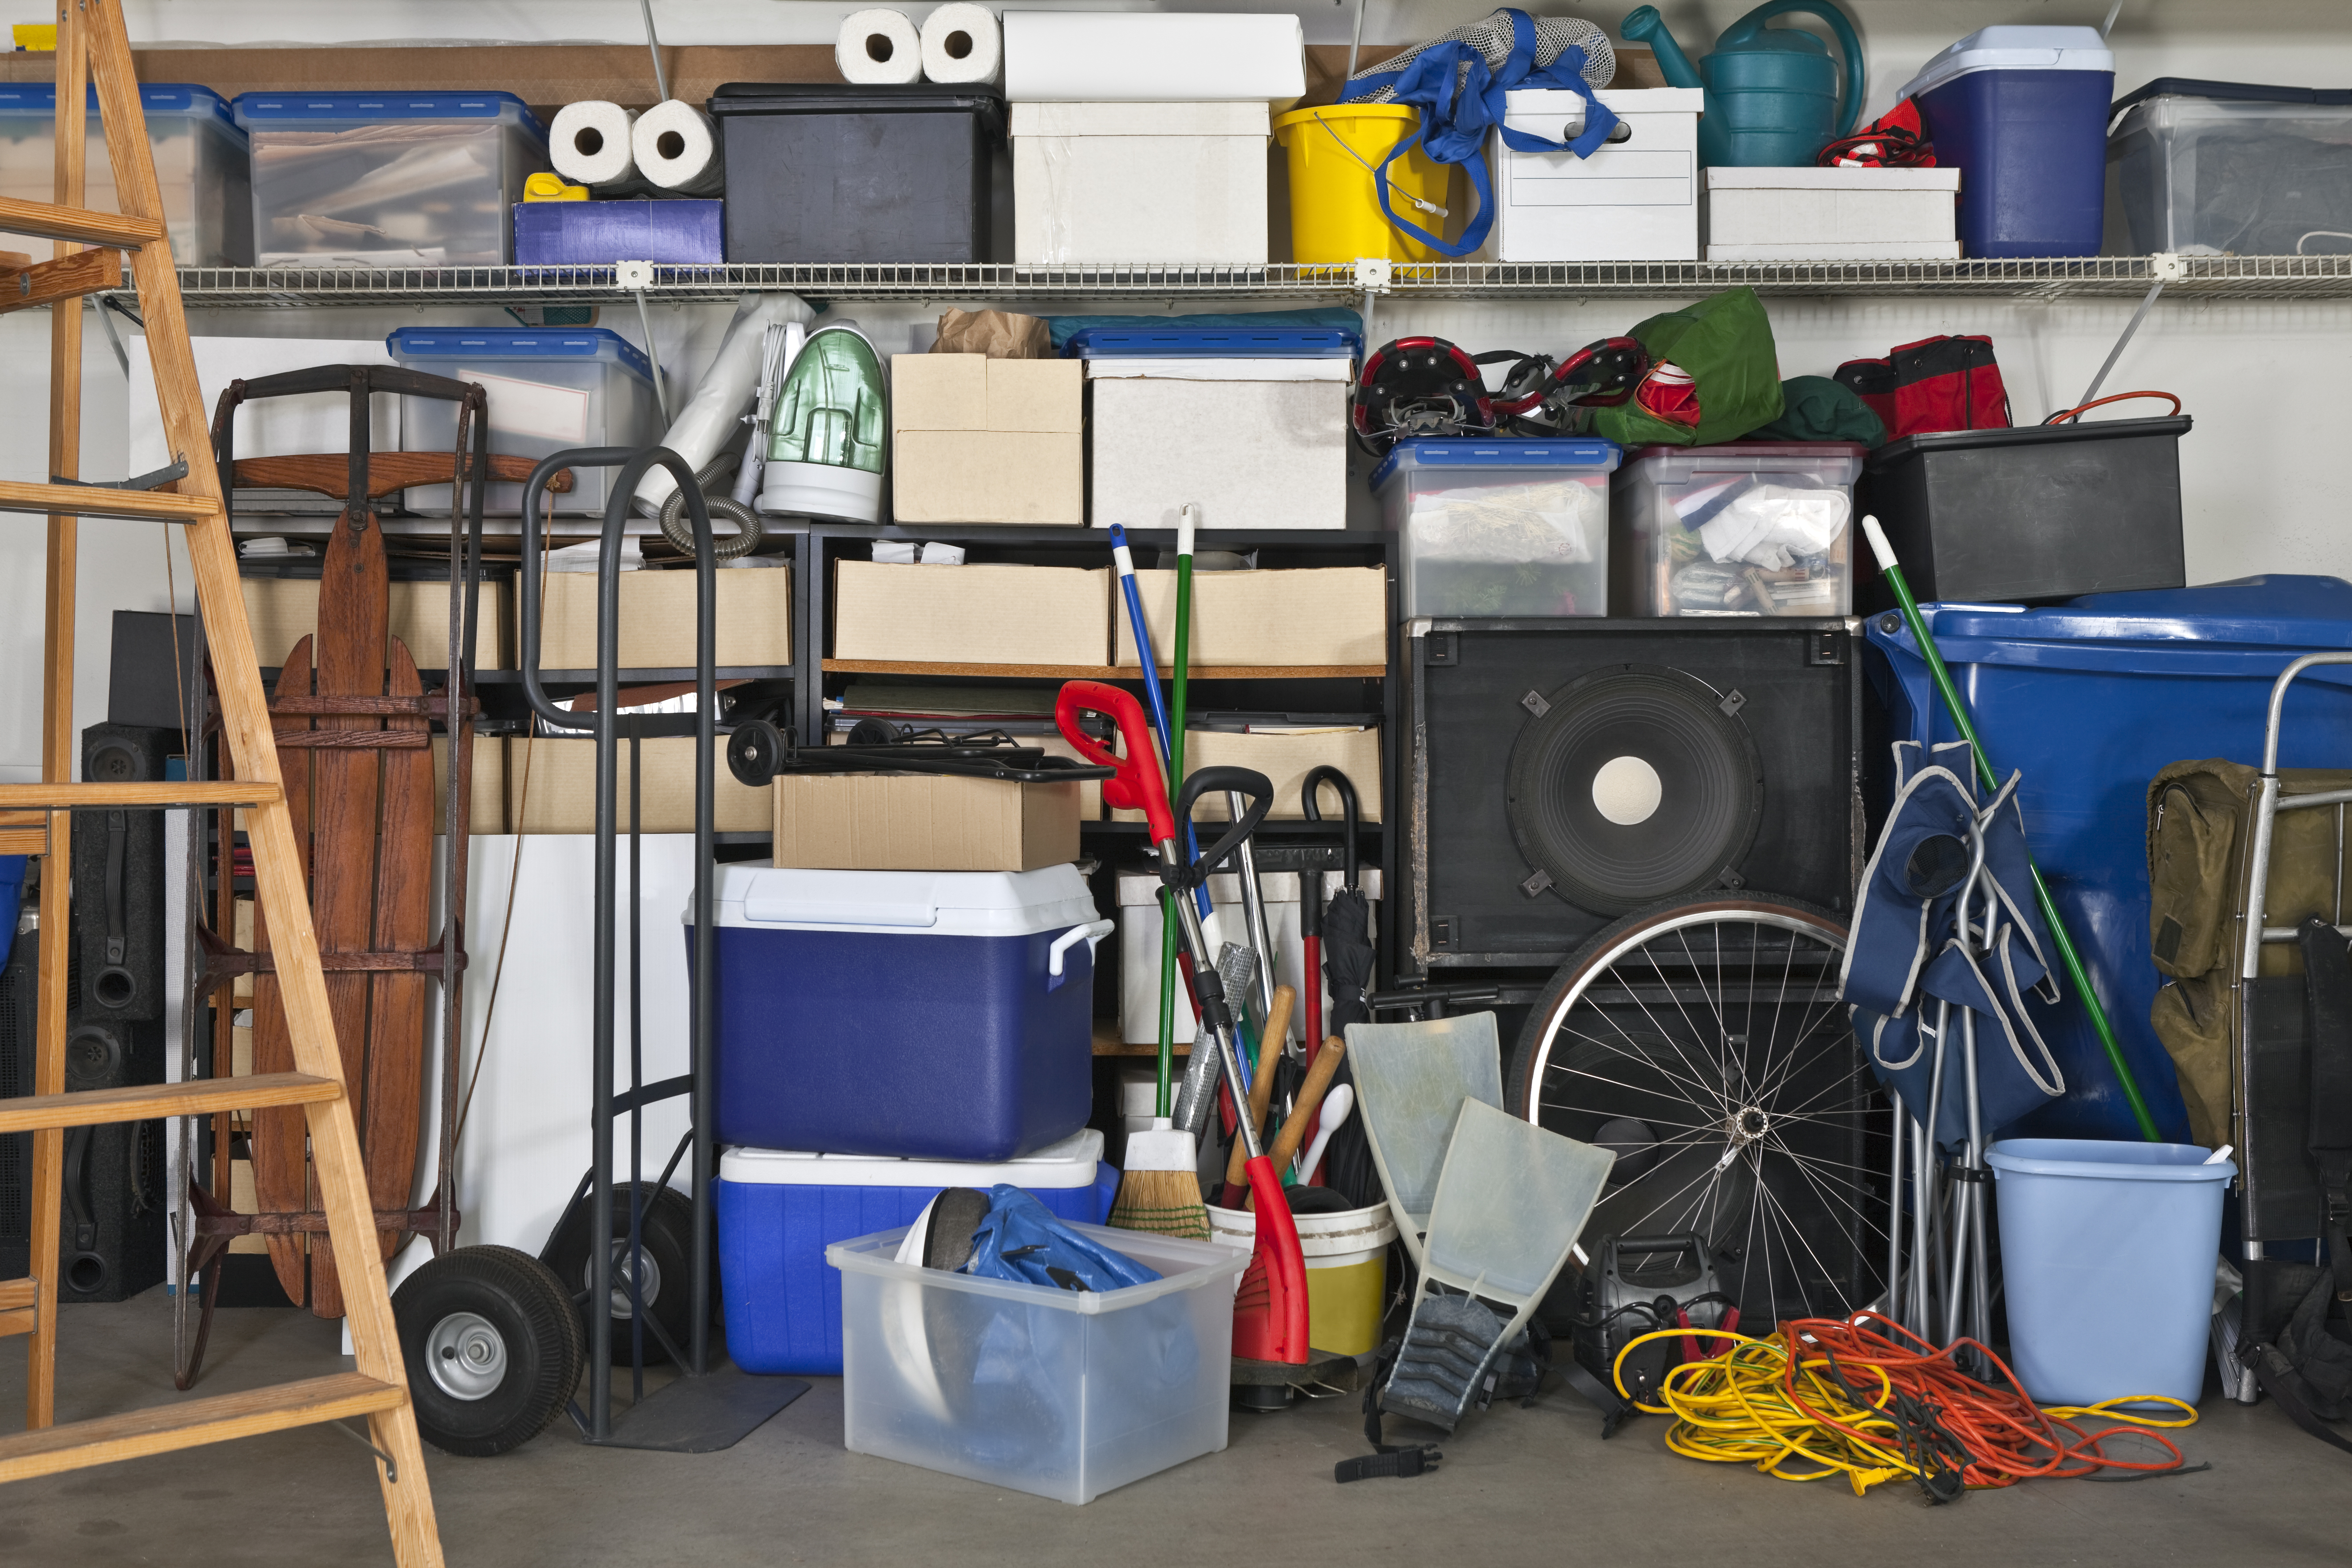 https://mackmaids.com/wp-content/uploads/2018/04/How-to-Organize-Your-Garage-in-4-Simple-Steps.jpg